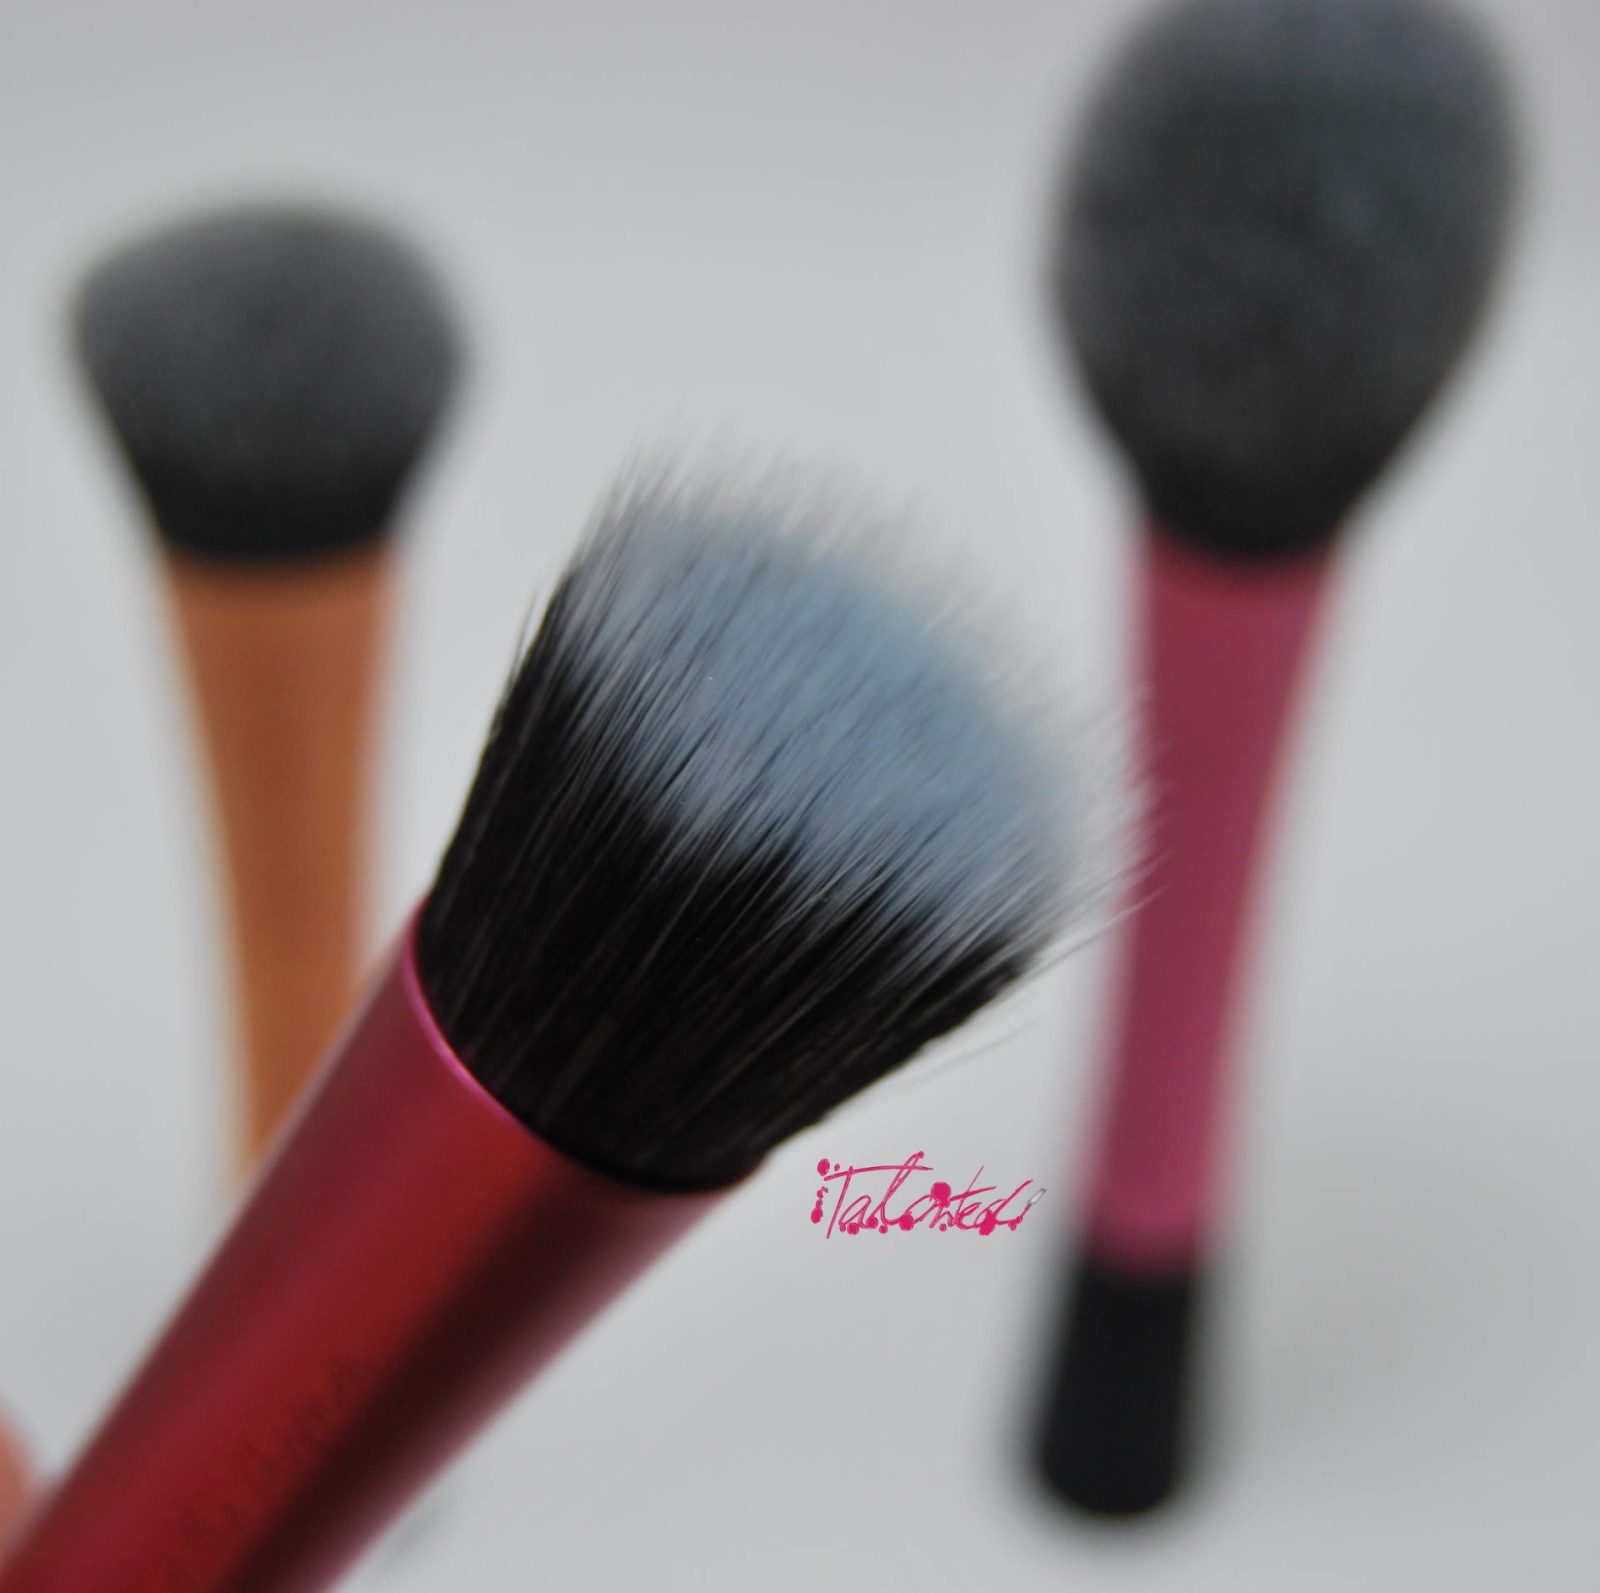 Real Techniques Brushes Mini Review